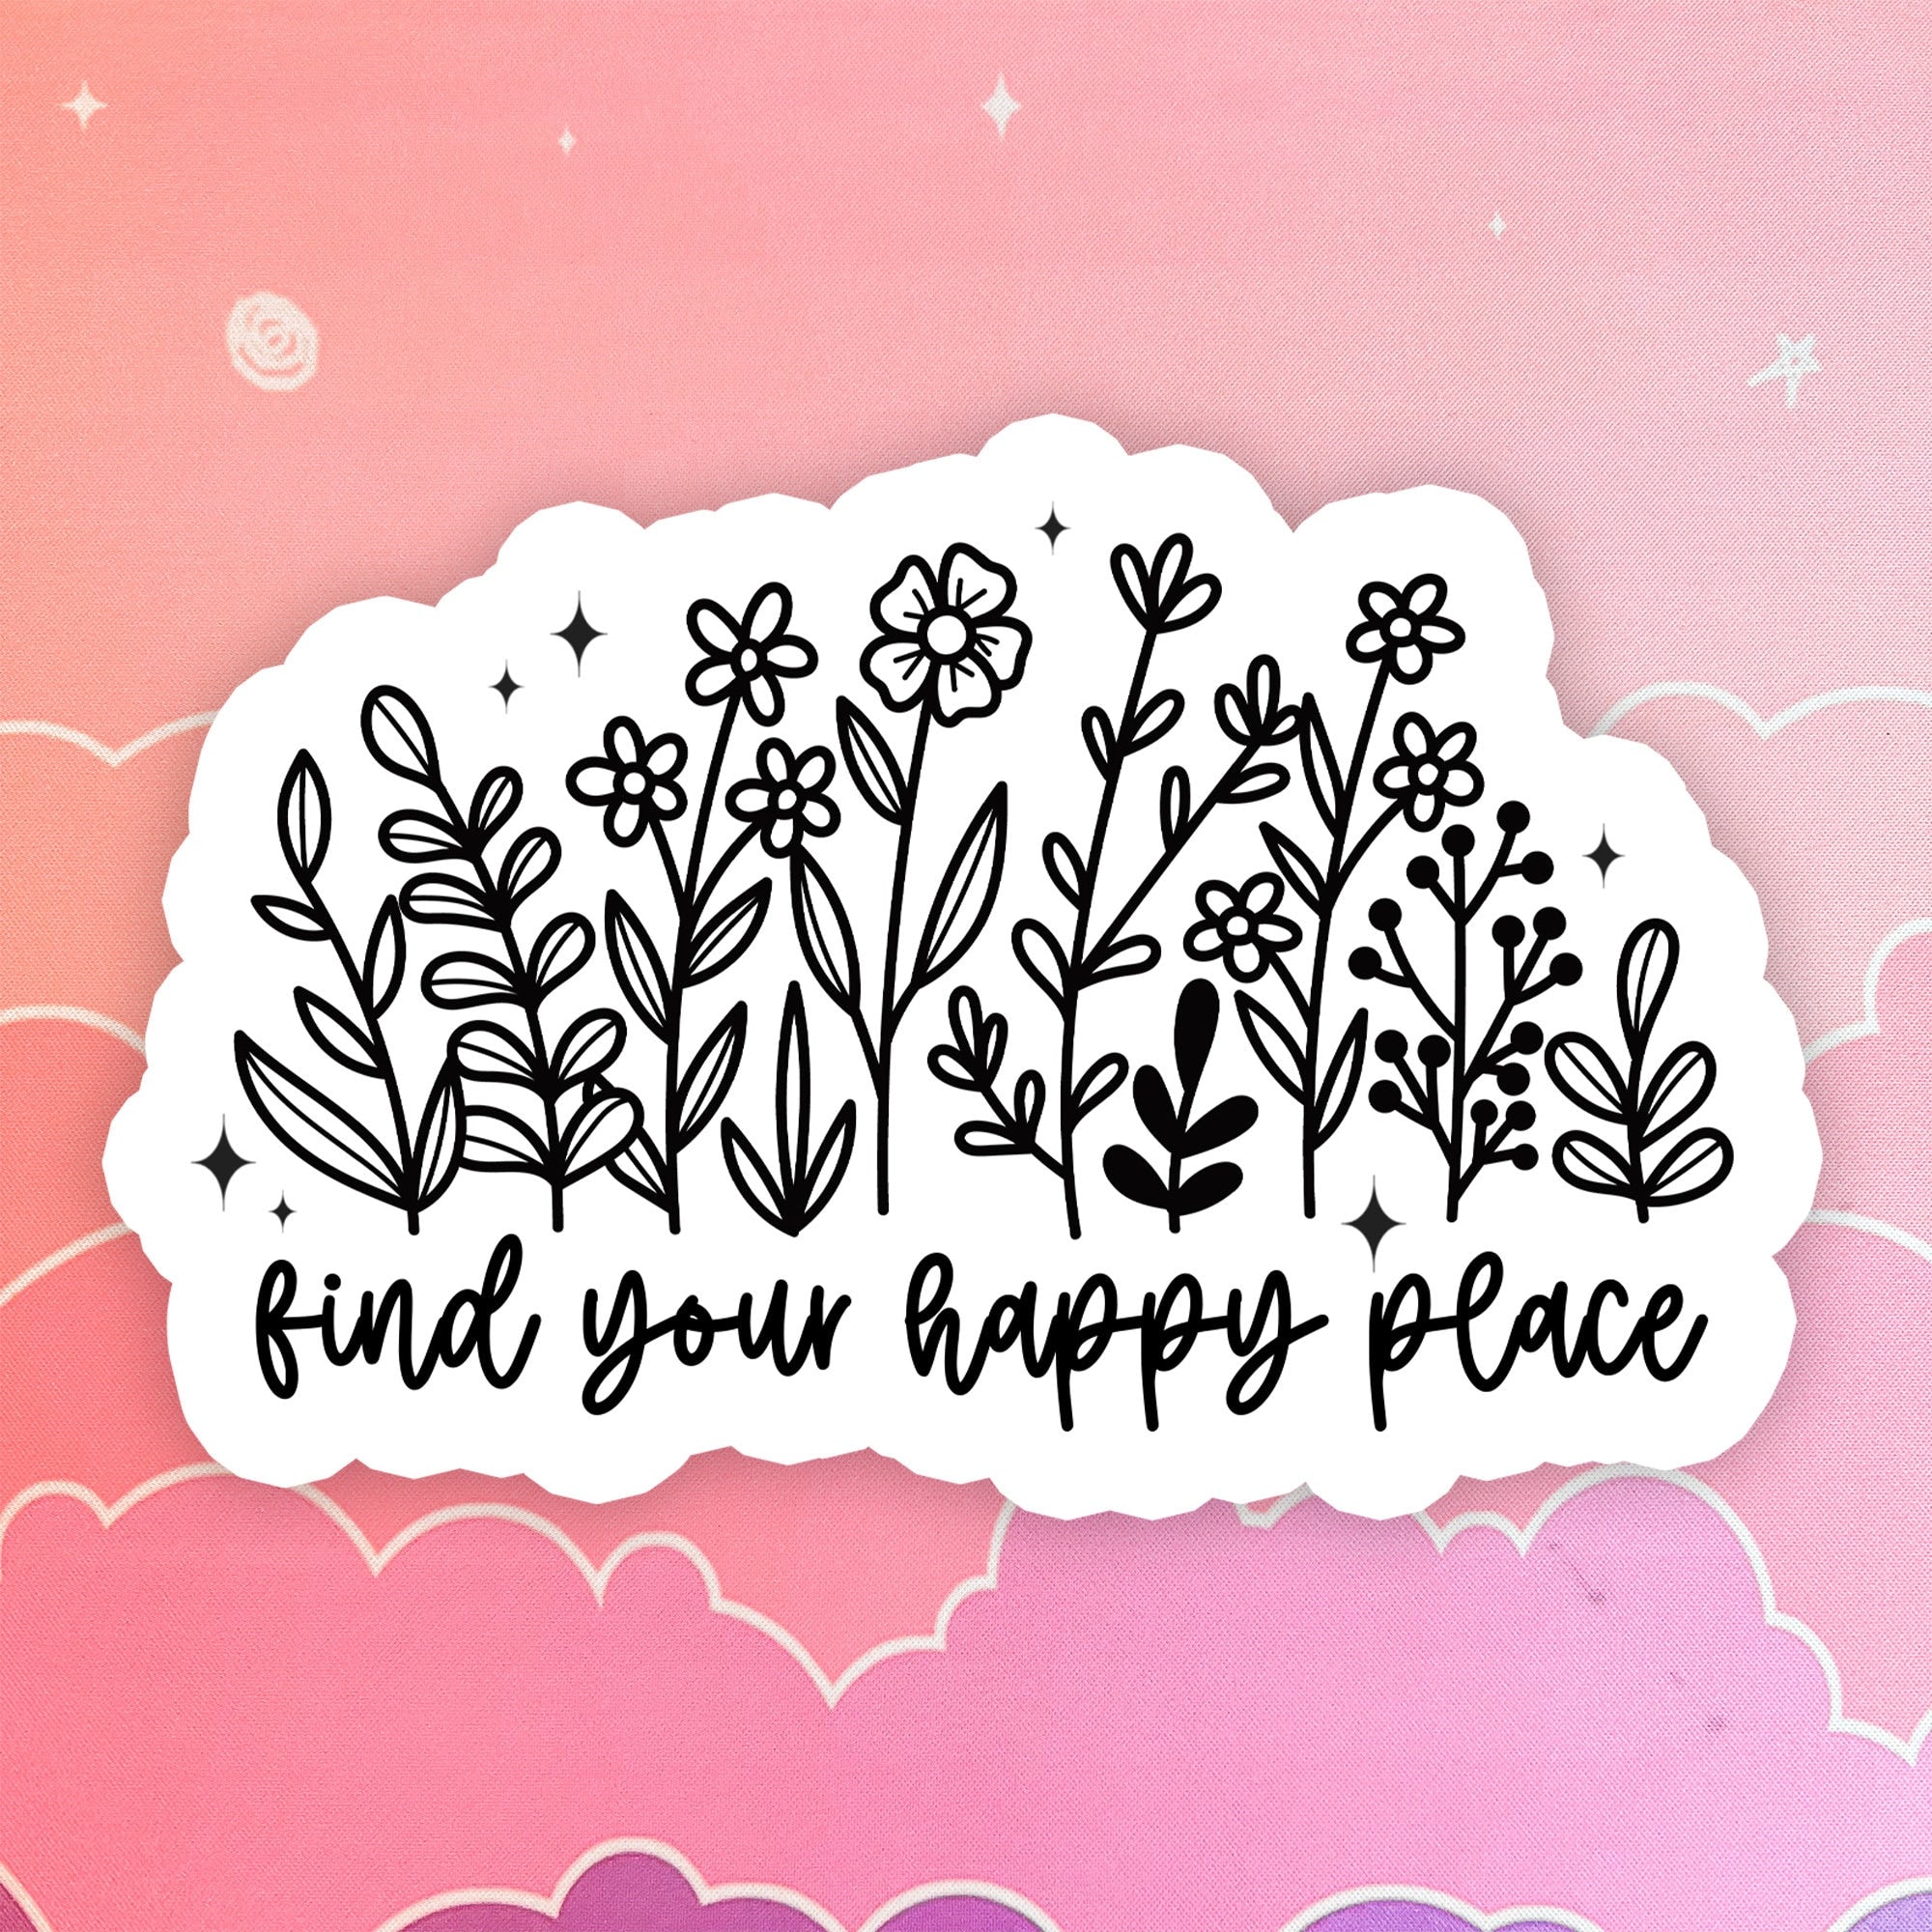 Find Your Happy Place Sticker motivational quote stickers for laptop, inspirational stickers for water bottles, hydroflask, kindle